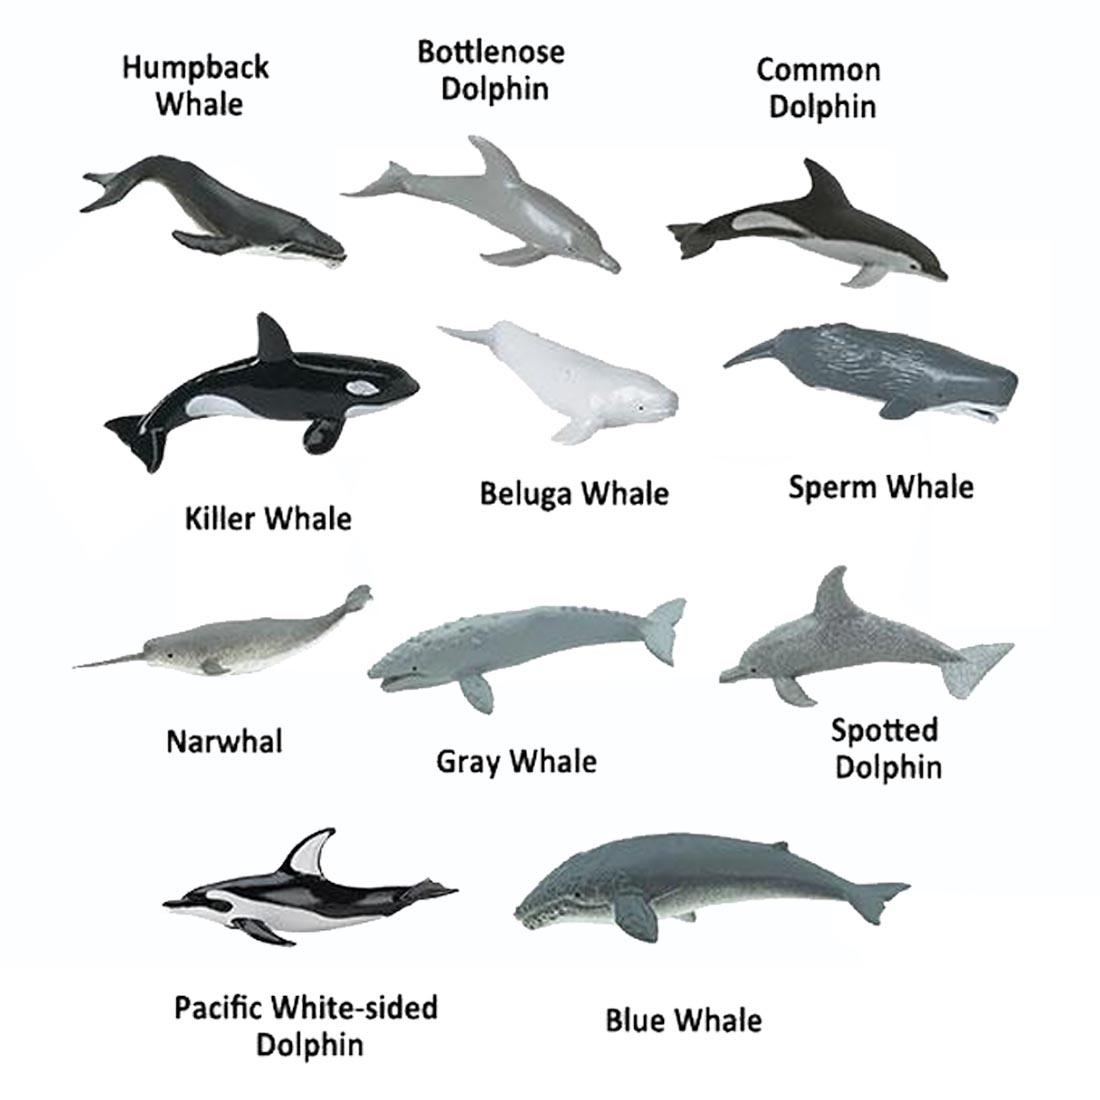 11 creatures from the Whales & Dolphins Figurine Set labeled with their names: humpback, killer, beluga, sperm, gray and blue whale; bottlenose, common, spotted & Pacific white-sided dolphin, narwhal